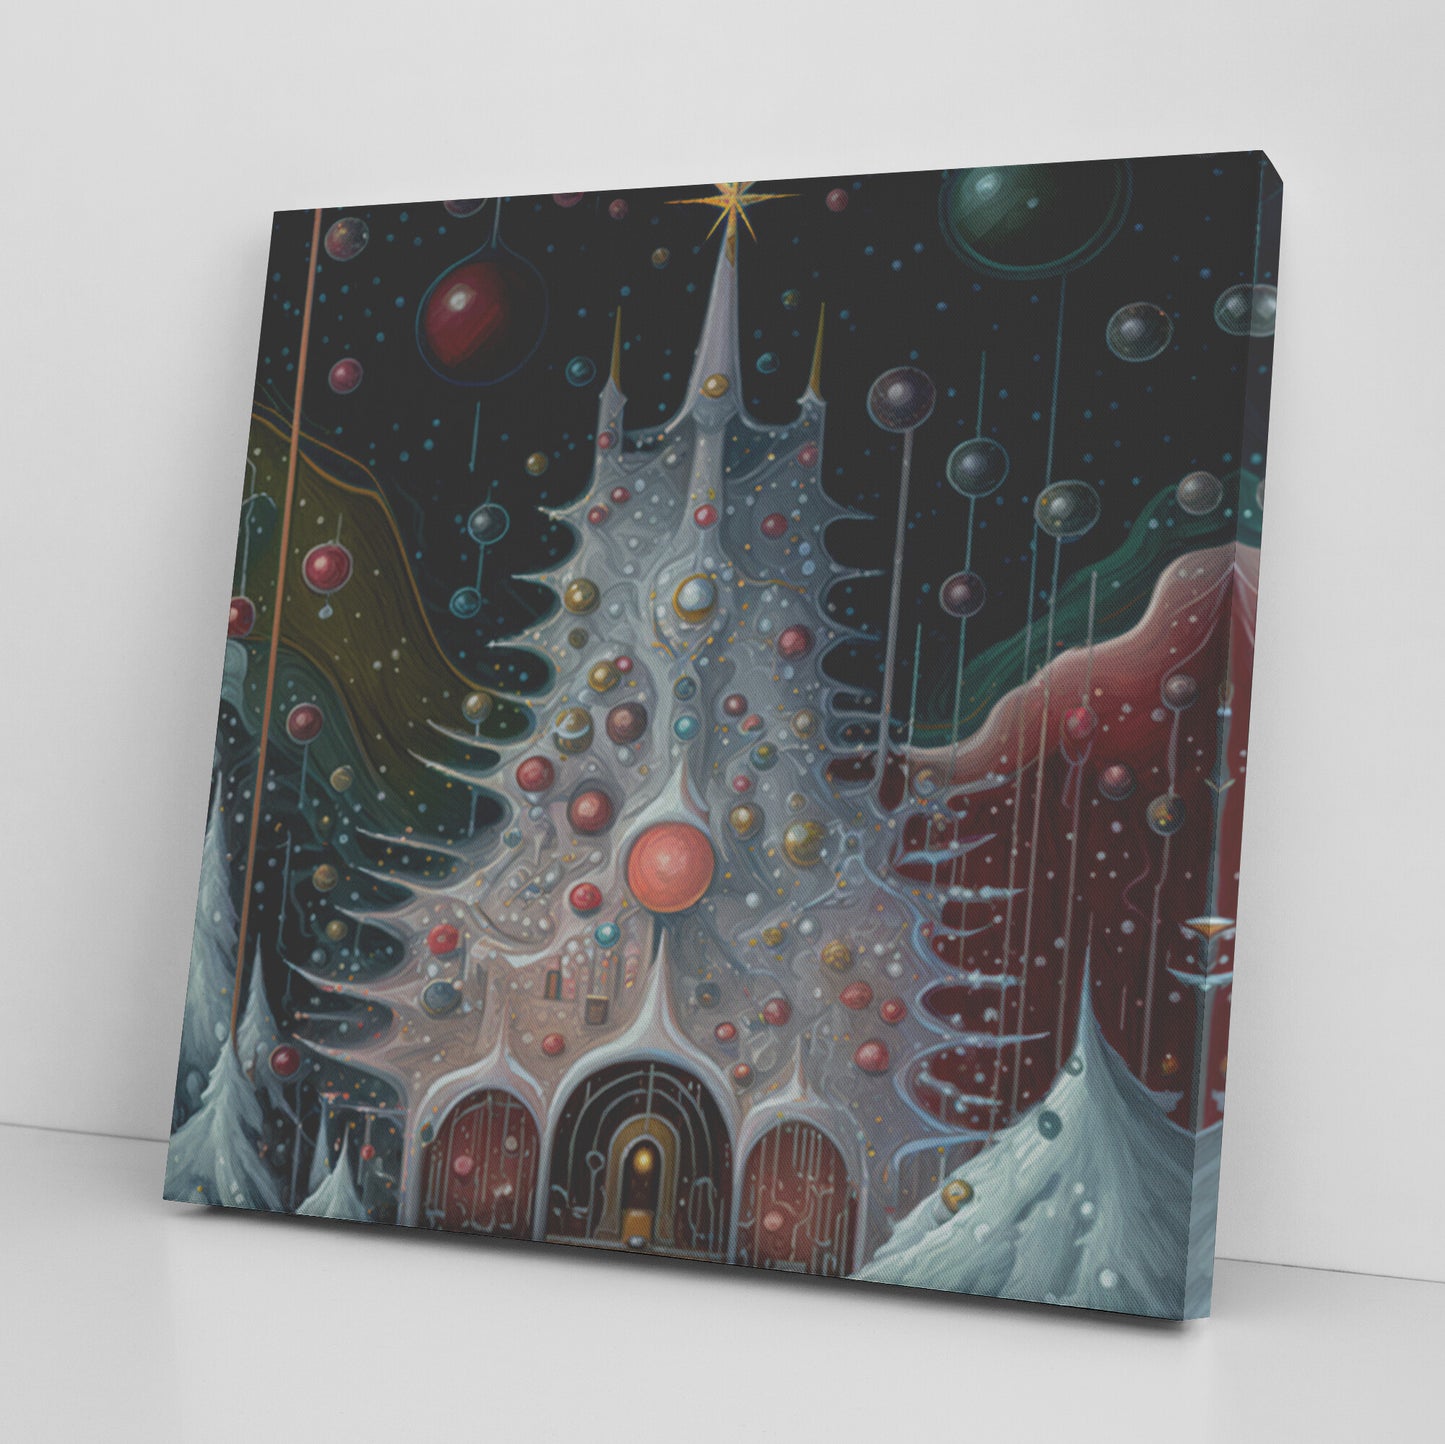 Abstract Snowy Christmas Tree Painting, Midjourney AI Generated Christmas Art